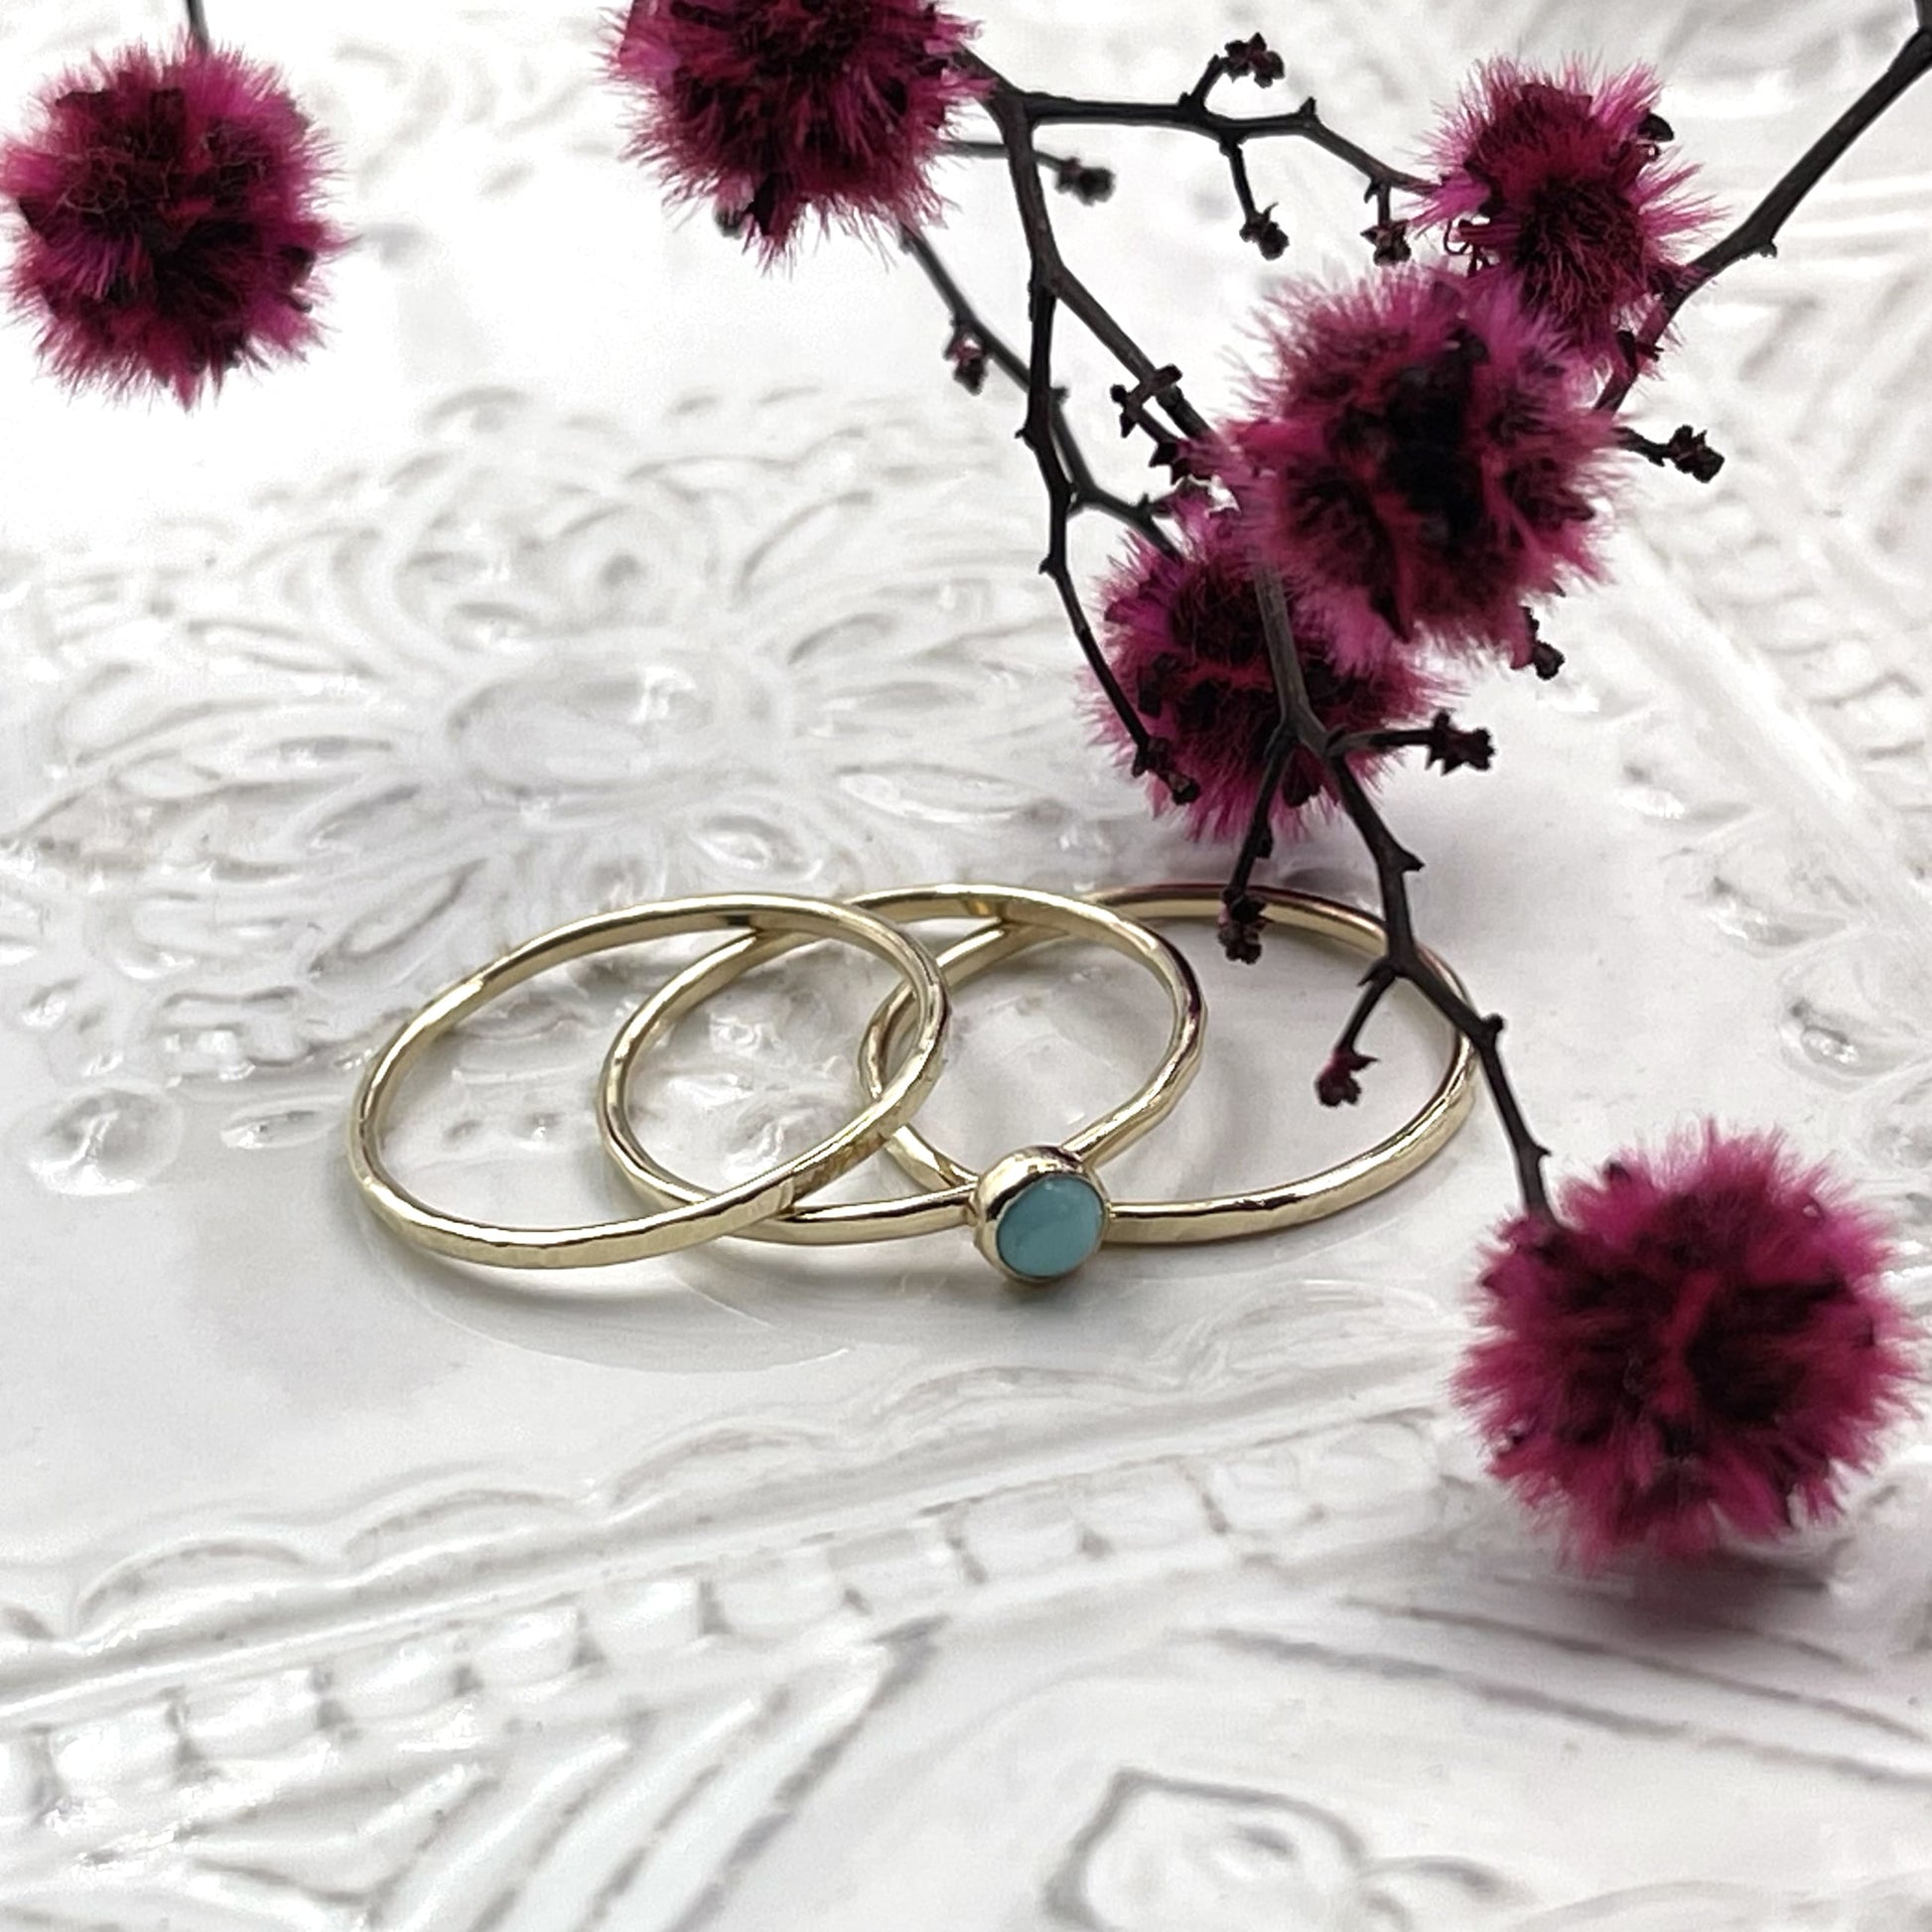 Set of 3 dainty gold rings with a turquoise cabochon on a white textured dish with dried purple flowers